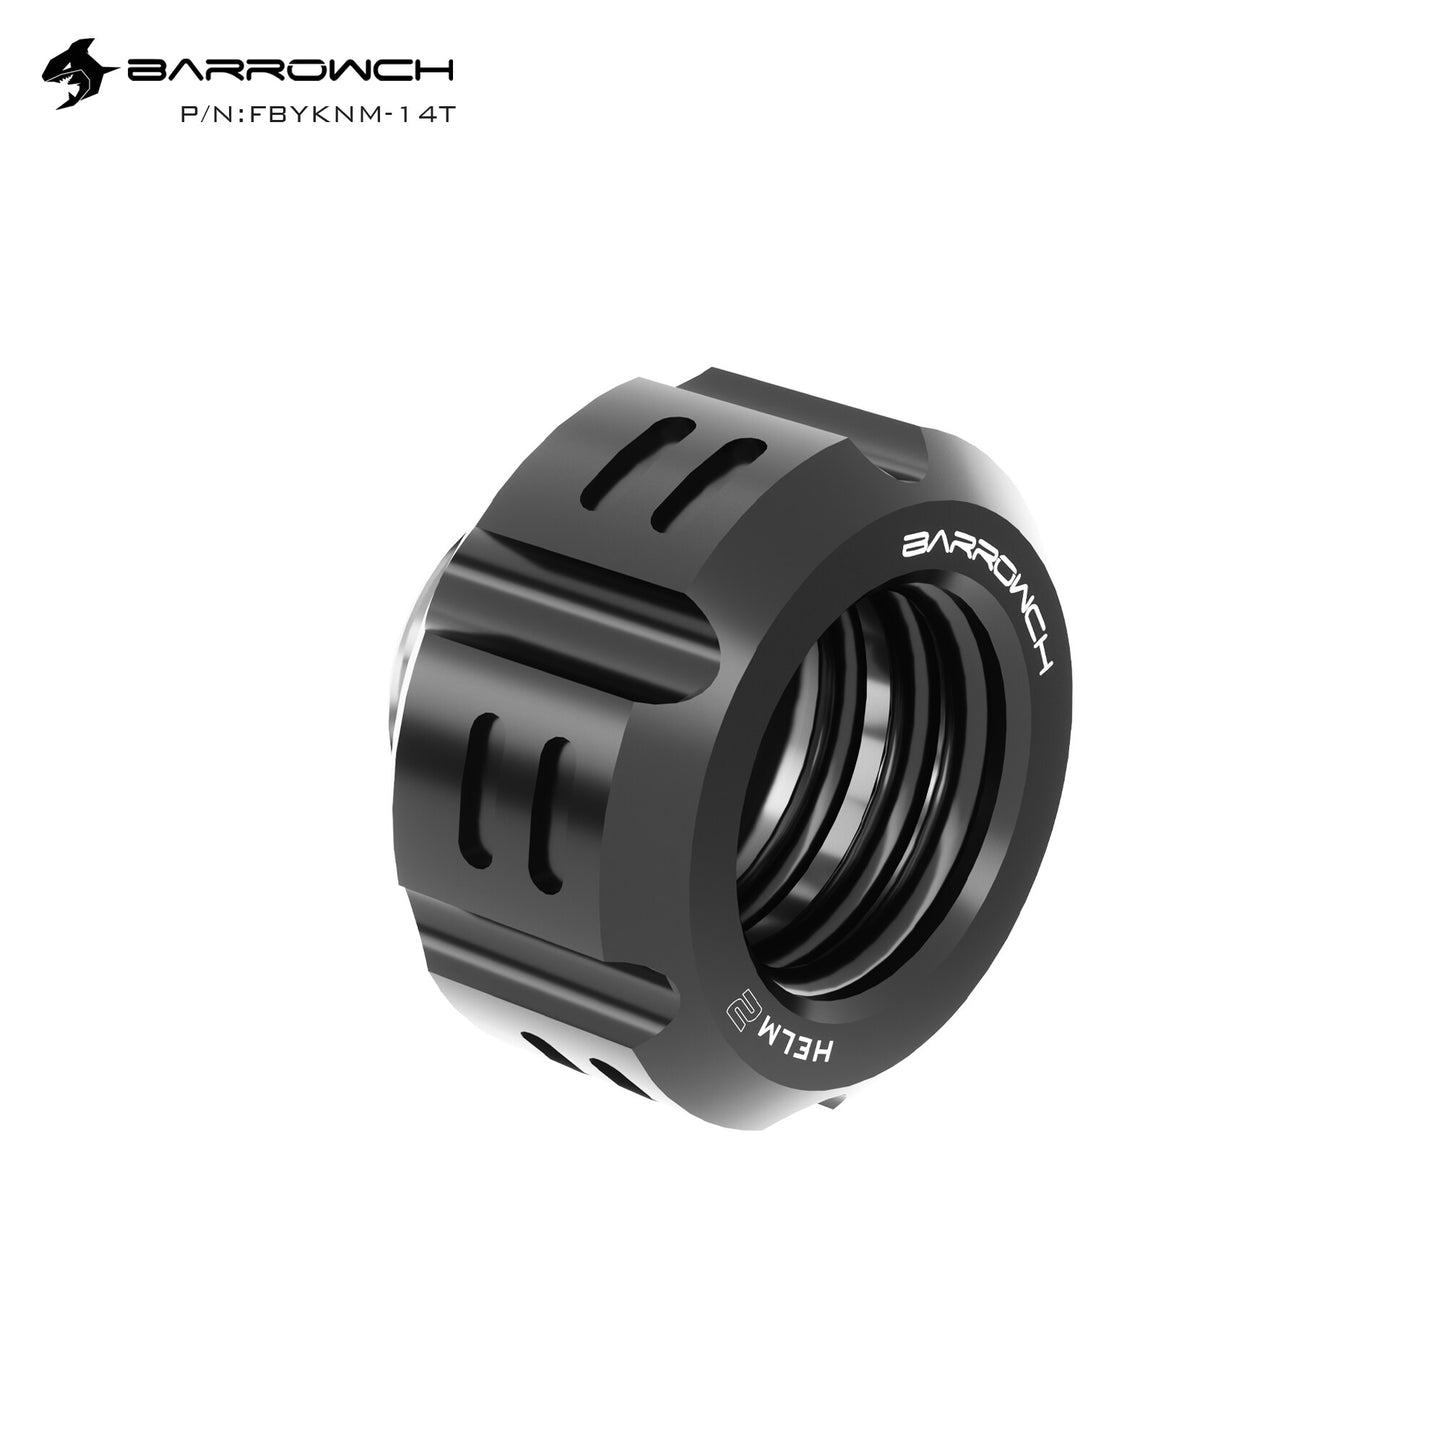 Barrowch Hard Fitting, Helm 2 edition For OD 14mm, Adapter For Water Cooling System,  FBYKNM-14